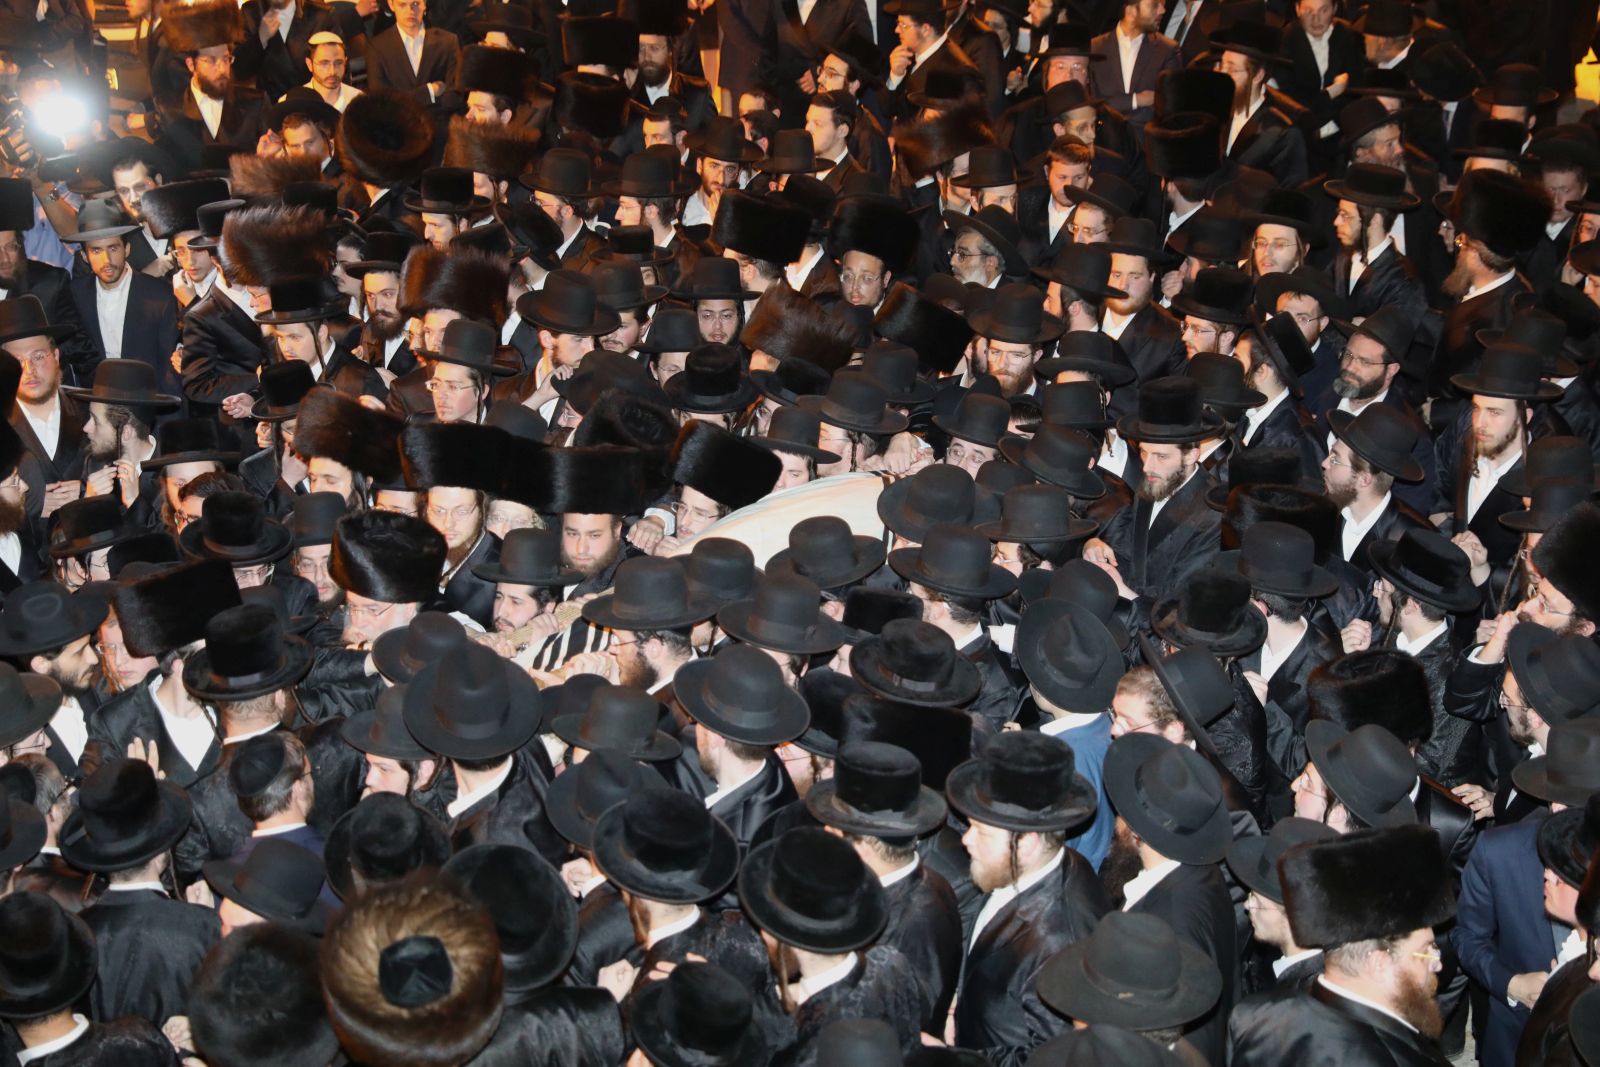 epa09172631 Ultra-Orthodox mourners carry the body of Menachem Kenlowitz who died in a stampede during Lag Ba'Omer in Mount Meron during his funeral at the Shamgar Funeral House in Jerusalem, 01 May 2021.  At least 45 people were killed and scores injured in the revelry complex on Mount Meron, after an apparent stampede occured on early 30 April 2021 during an event marking the end of the Jewish holiday of Lag Ba'Omer, the day that marks the death anniversary of Rabbi Shimon bar Yochai, a sage from some 1,800 years ago, and the day on which he revealed the secrets of the 'kabbalah,' or Jewish mysticism.  EPA/ABIR SULTAN